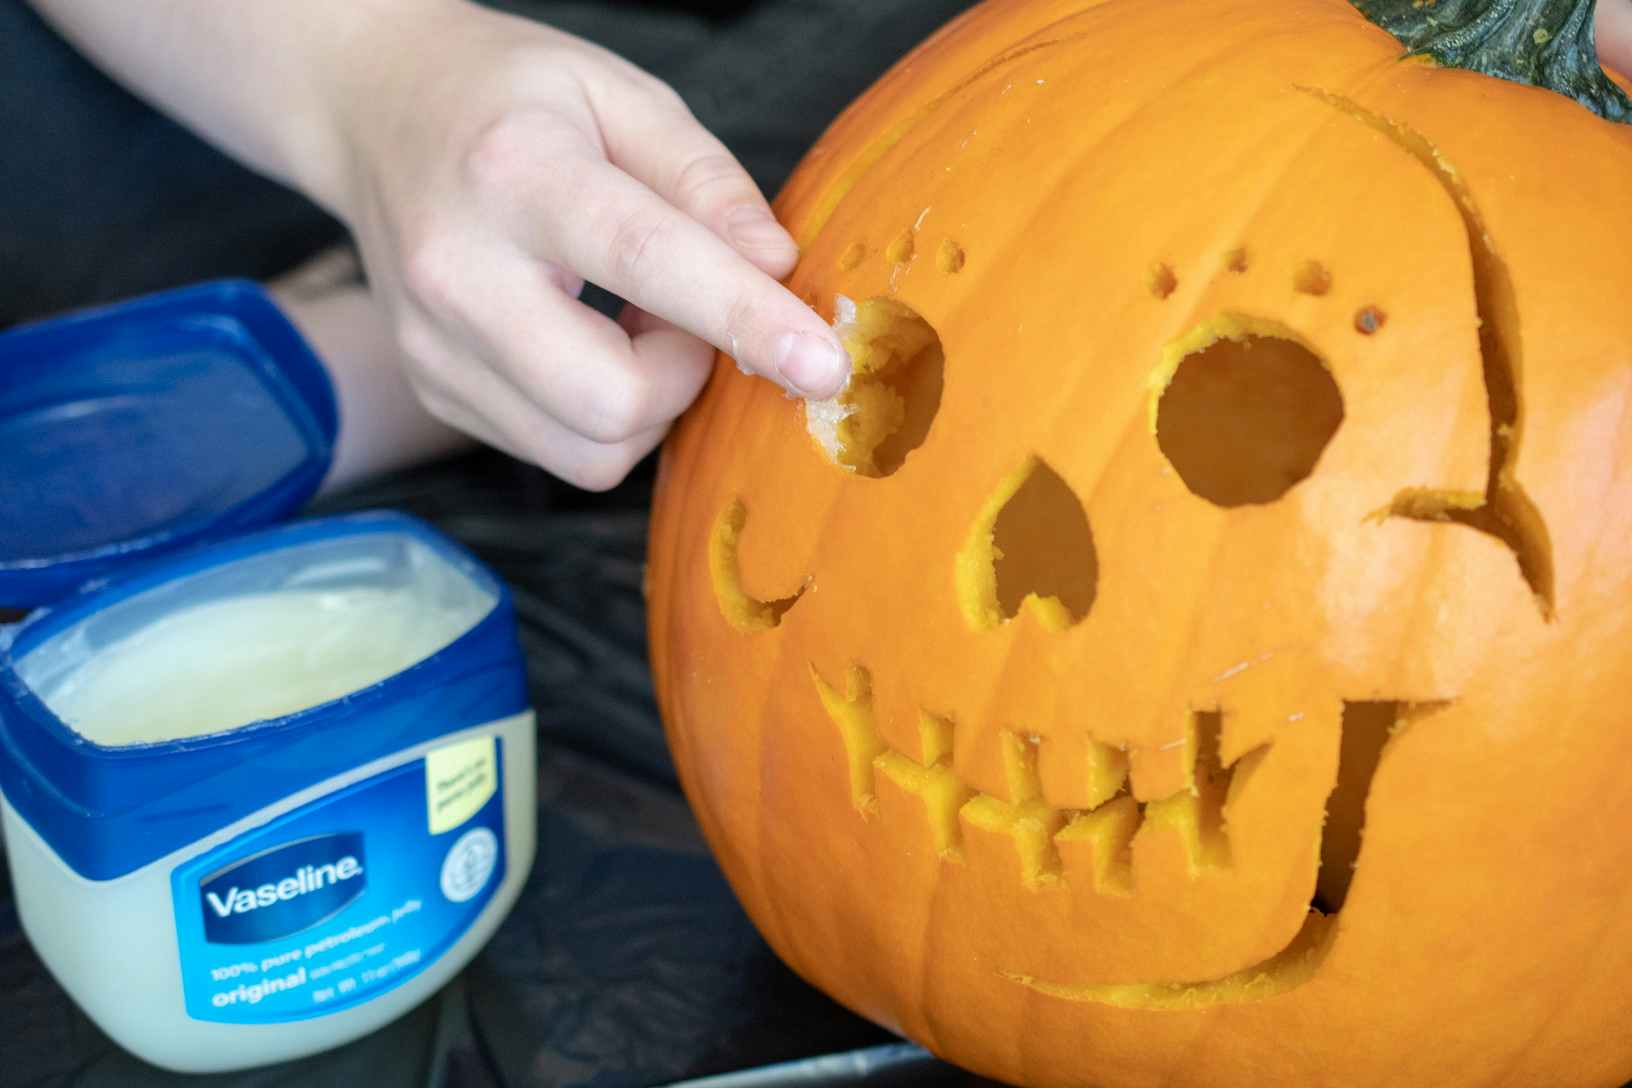 Person applying vaseline to a carved pumpkin